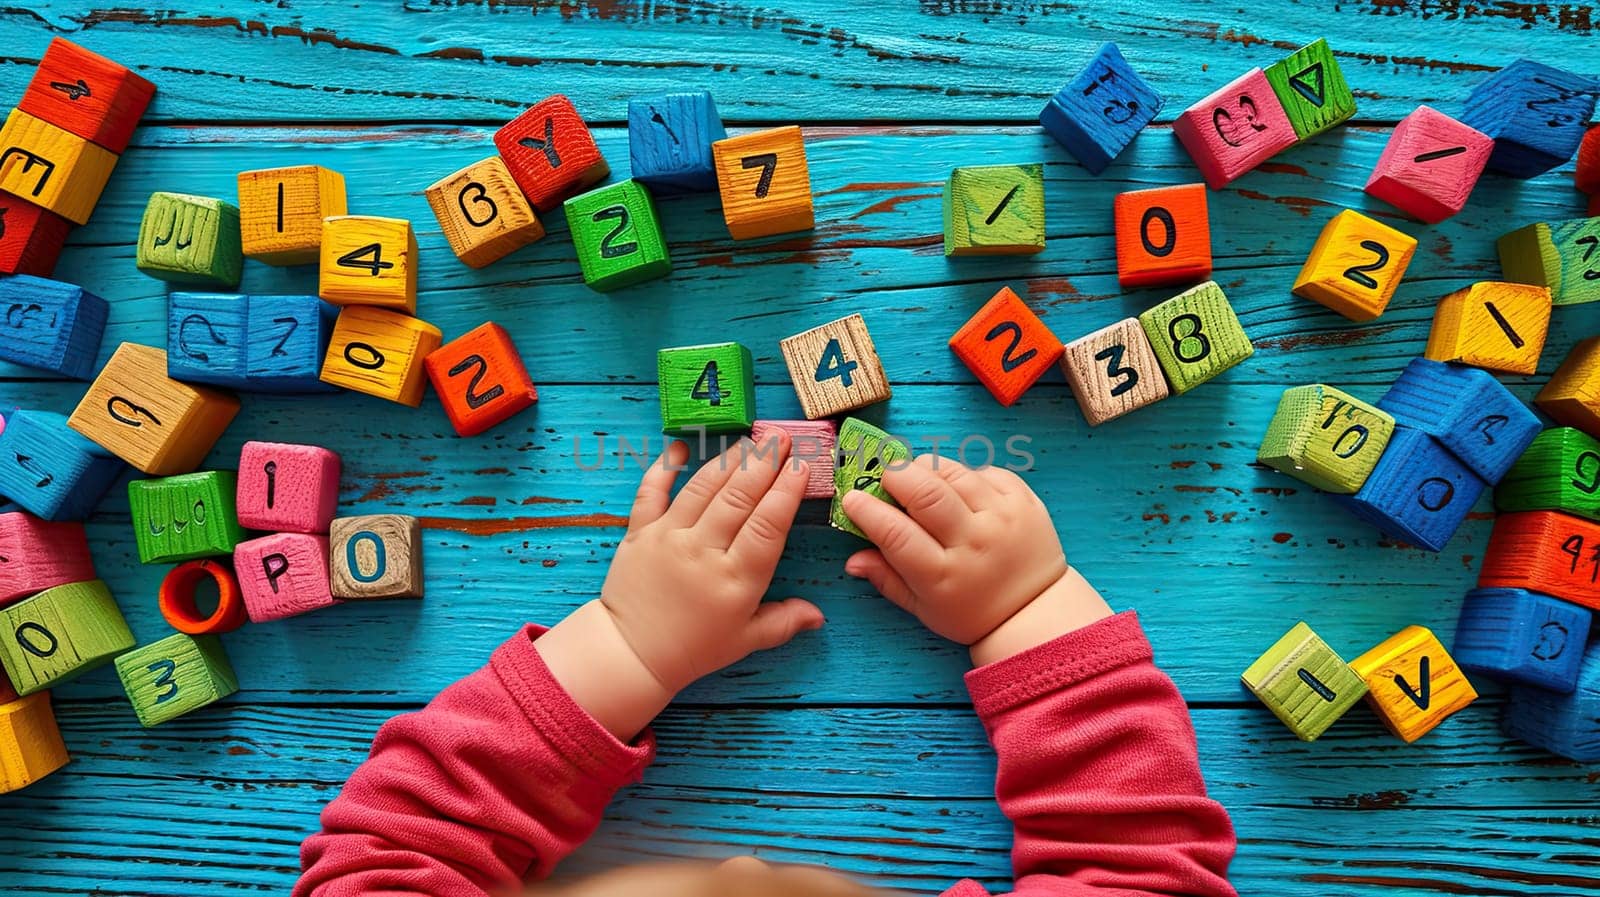 Top view of a child playing with wooden cubes with numbers and colorful toy bricks on a turquoise wooden background.